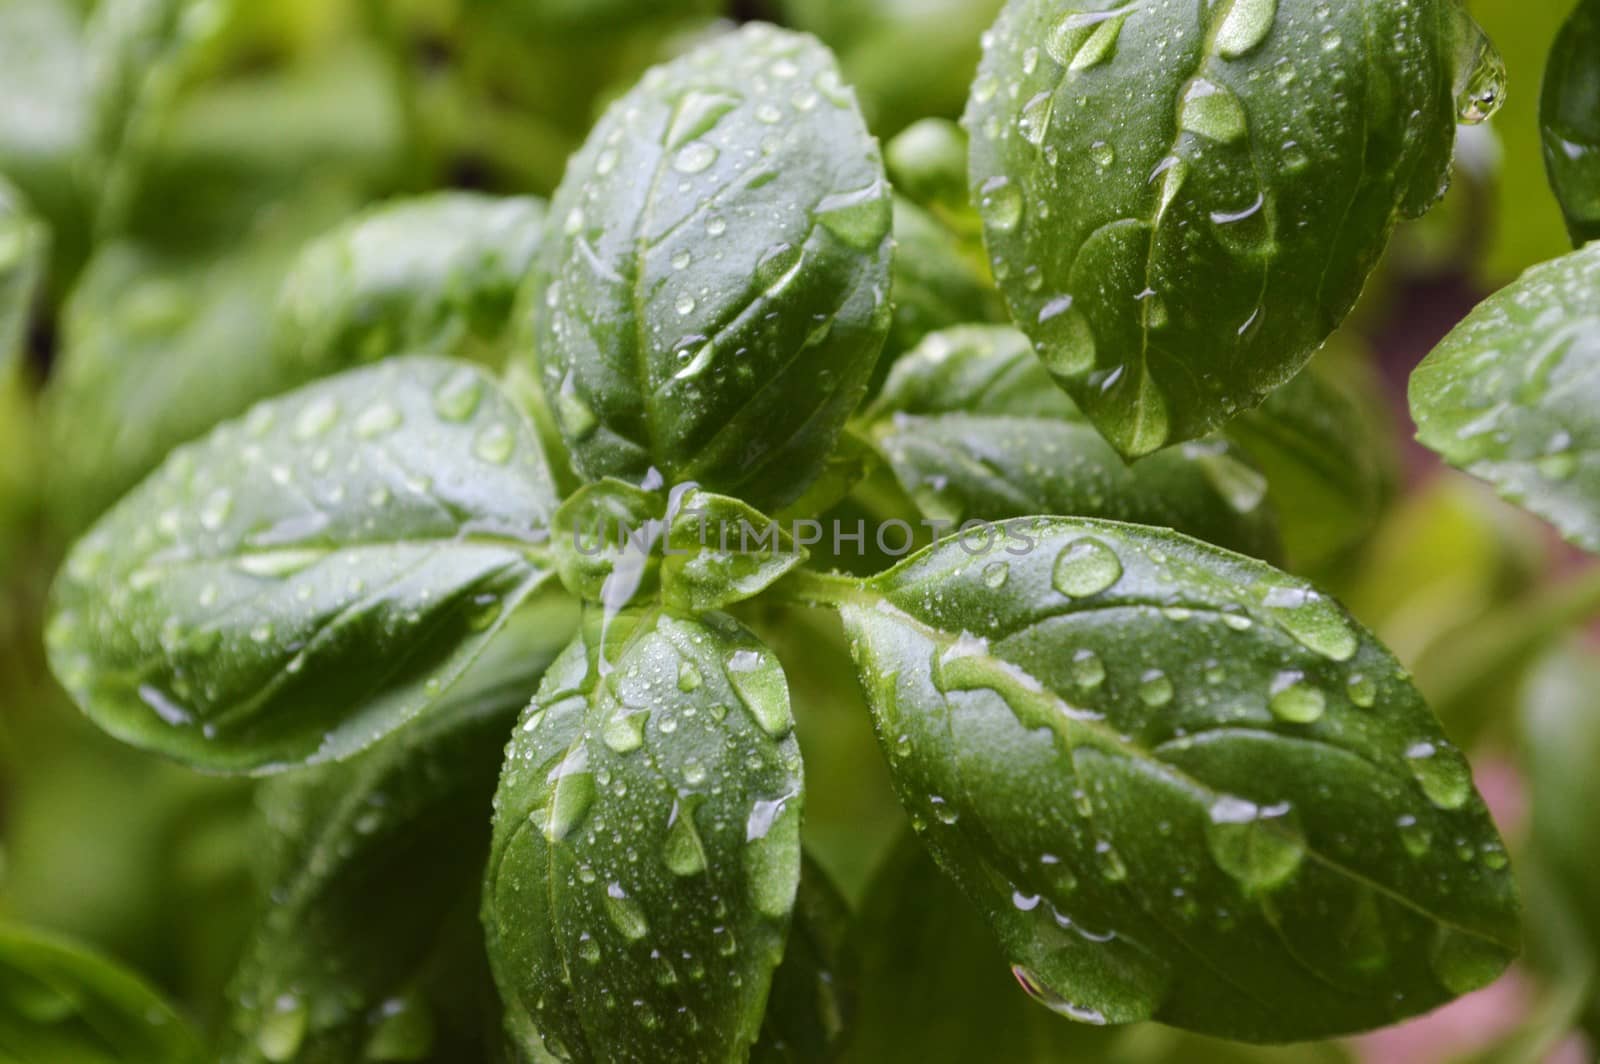 A close-up image of fresh green basil leaves.